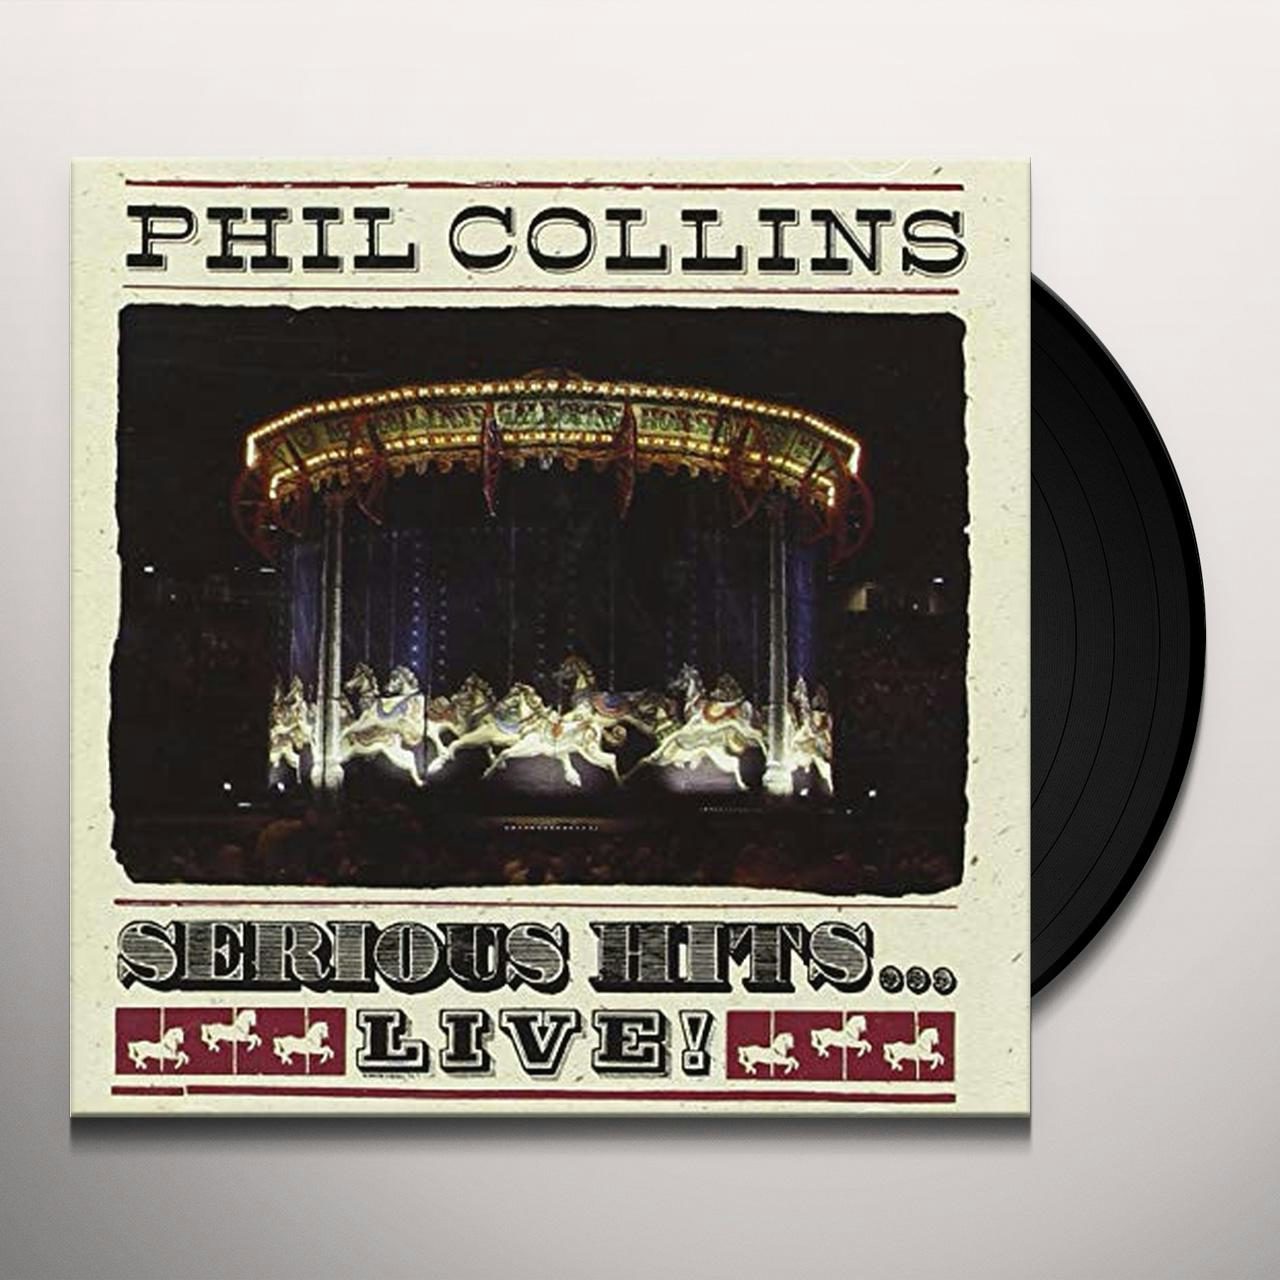 SERIOUS HITS LIVE Vinyl Record - Phil Collins